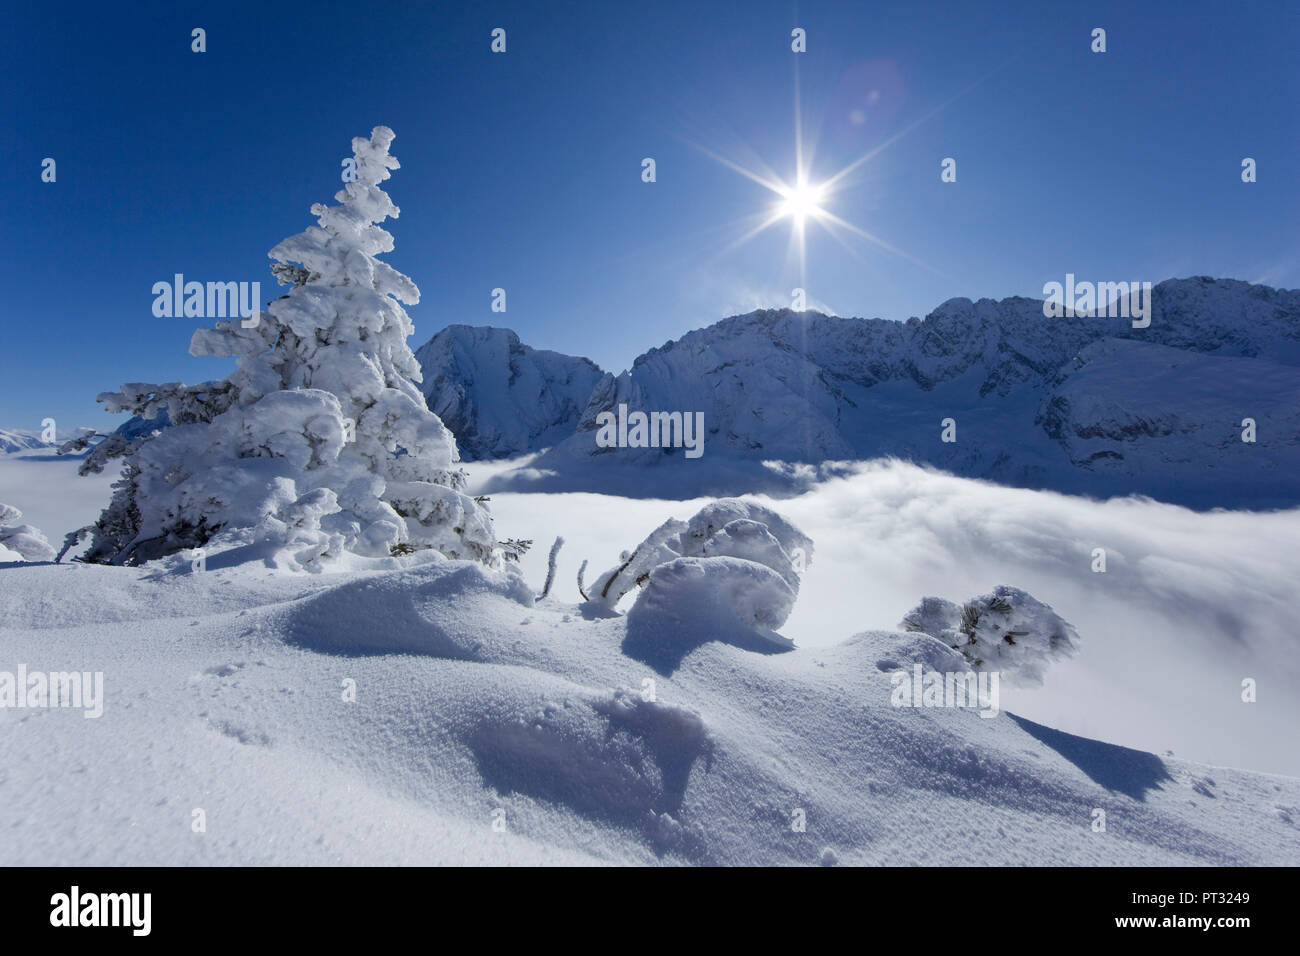 View of Mieming Range from Issentalkopf Peak in winter, Mieminger Mountains, Tyrol, Austria Stock Photo